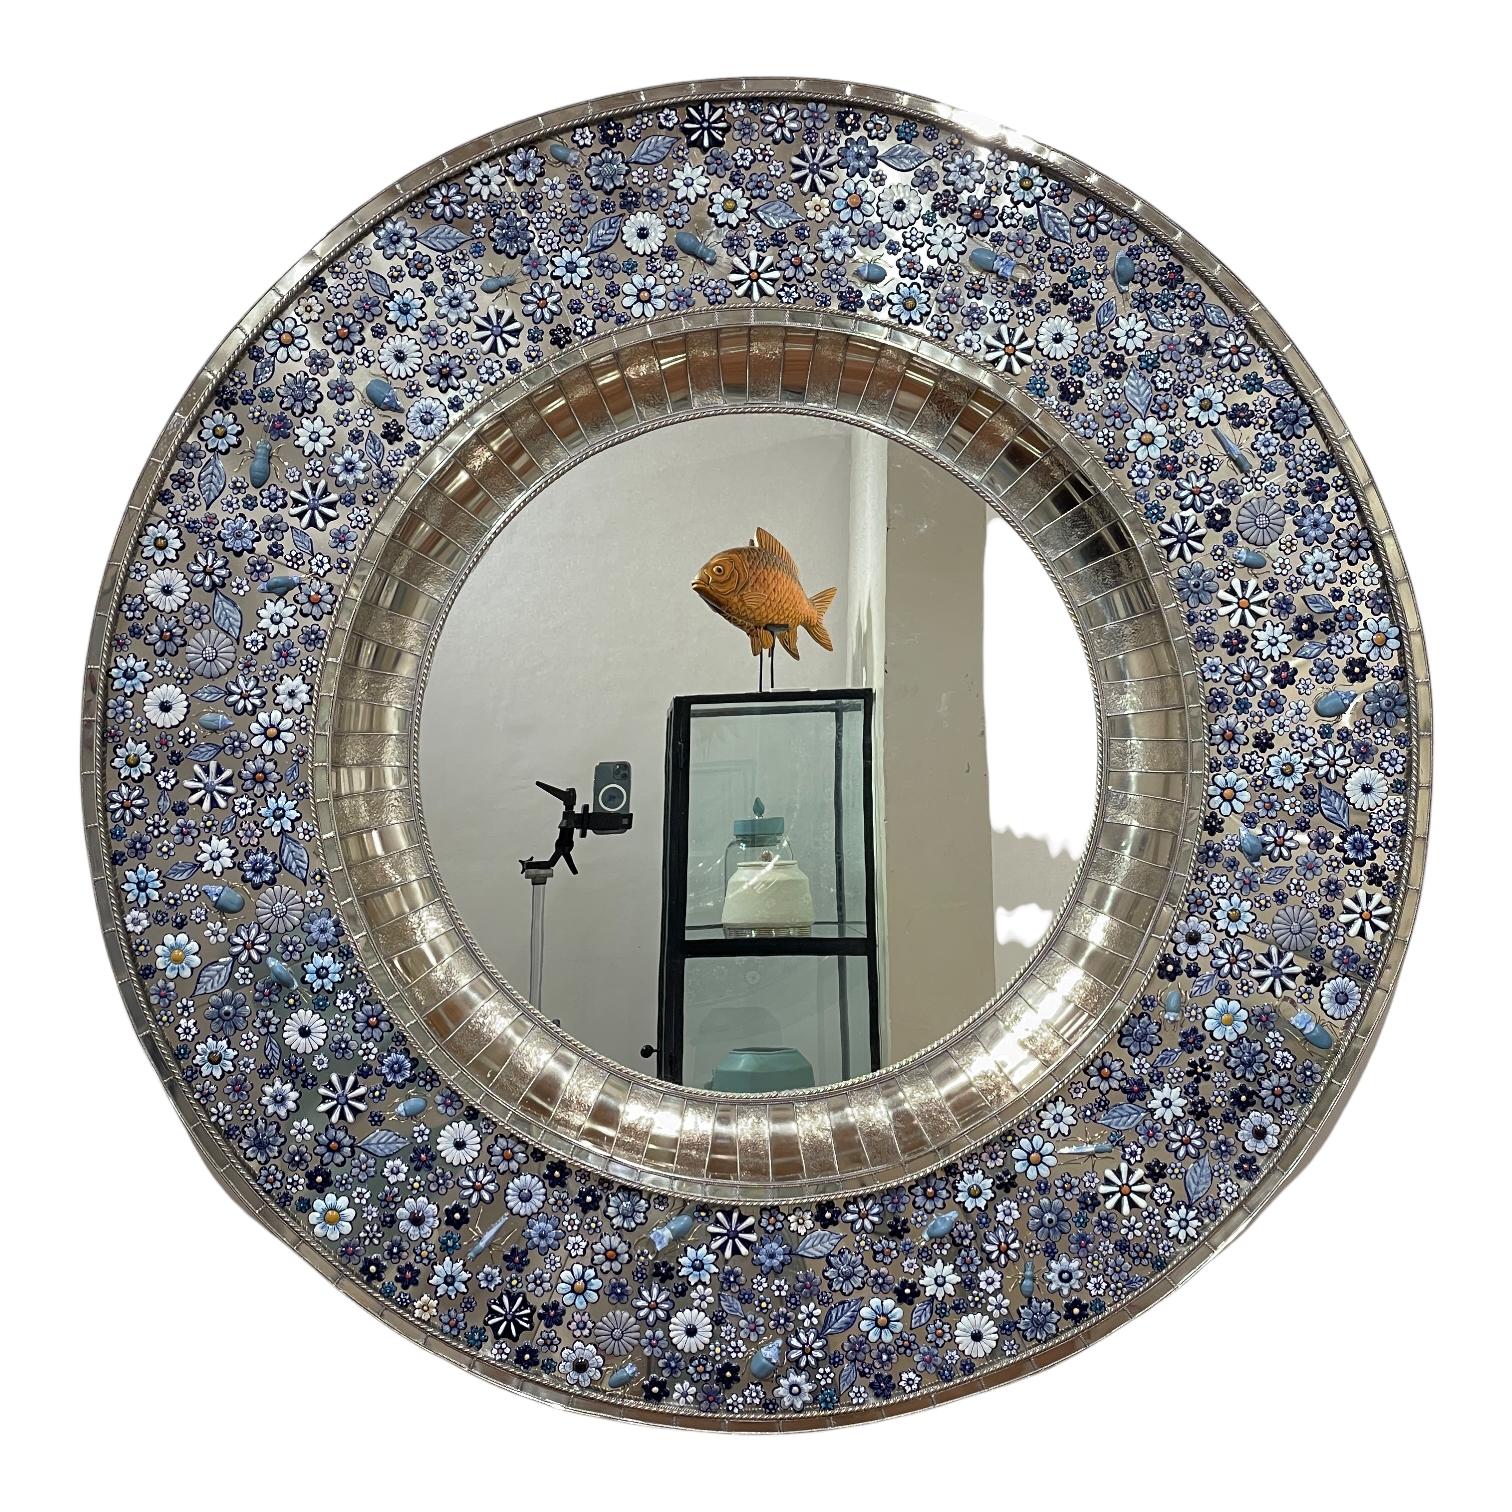 Other Roundy Convex Mirror, Hand Painted Ceramic Flowers and Insects over White Metal